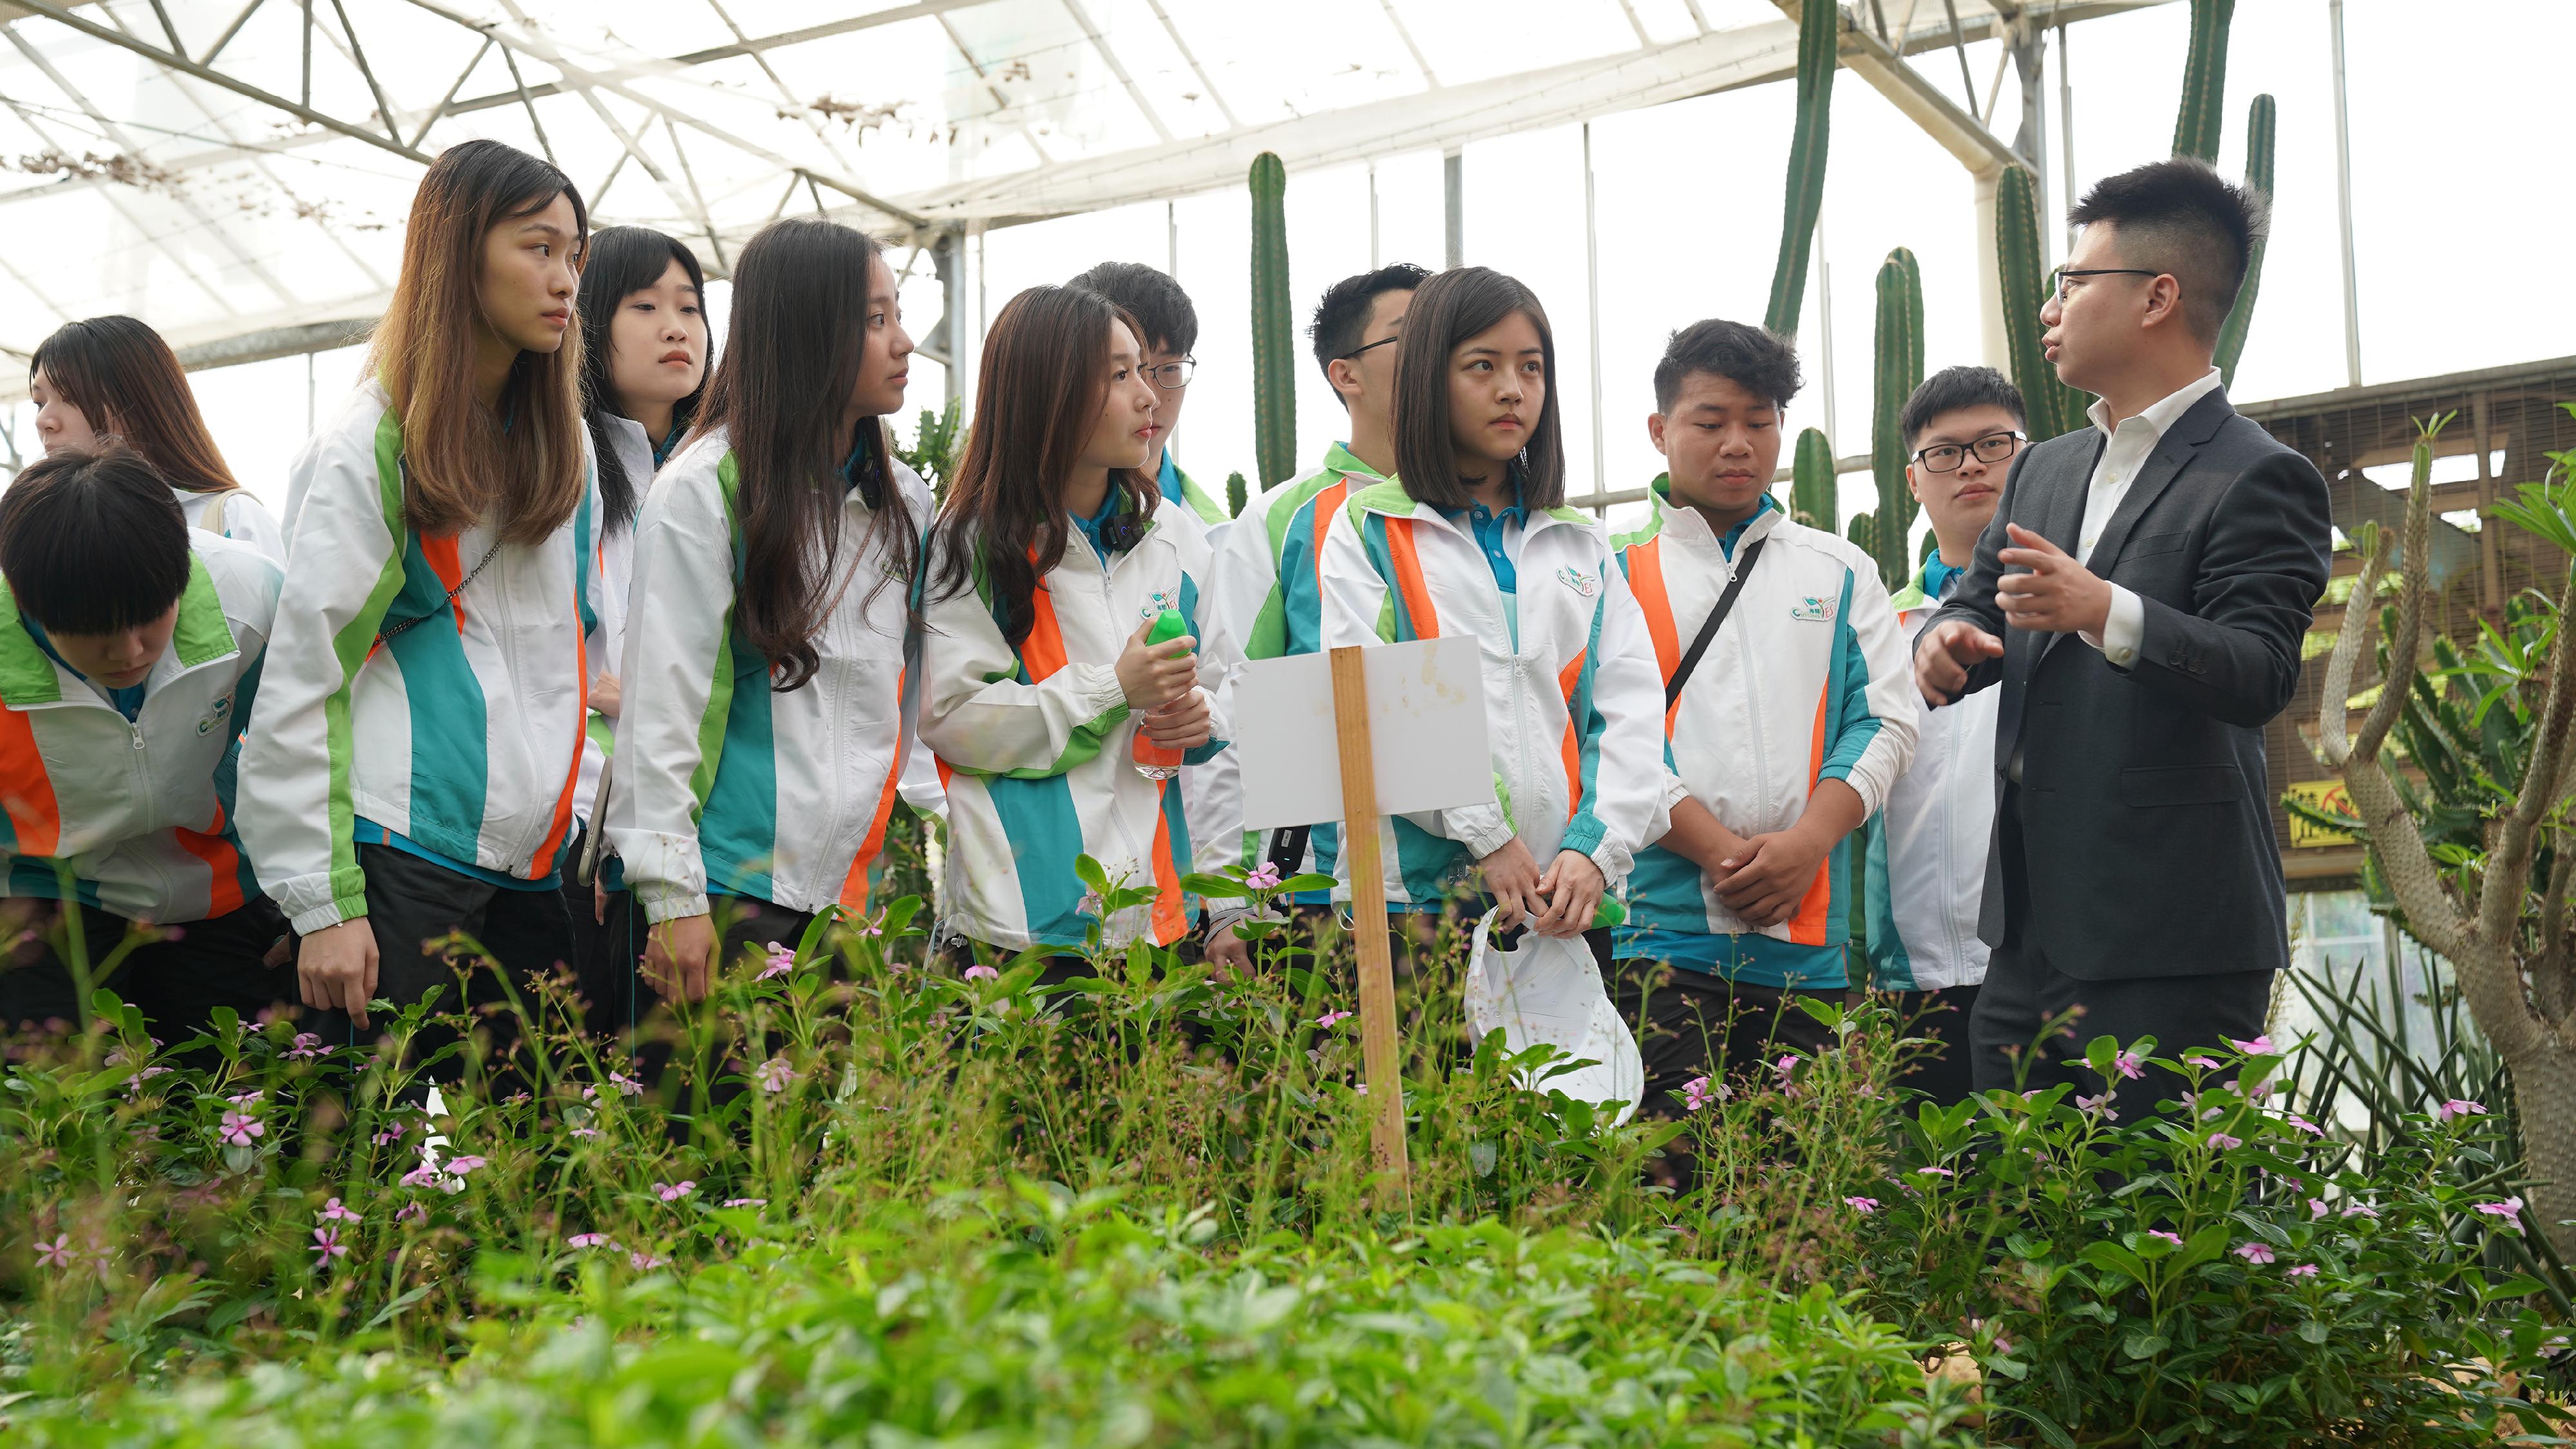 During their visit to the Guangming Tour Farm on March 19, some youth members of "Customs YES" are briefed on the inspection and quarantine measures for fresh vegetables and food products imported into Hong Kong.